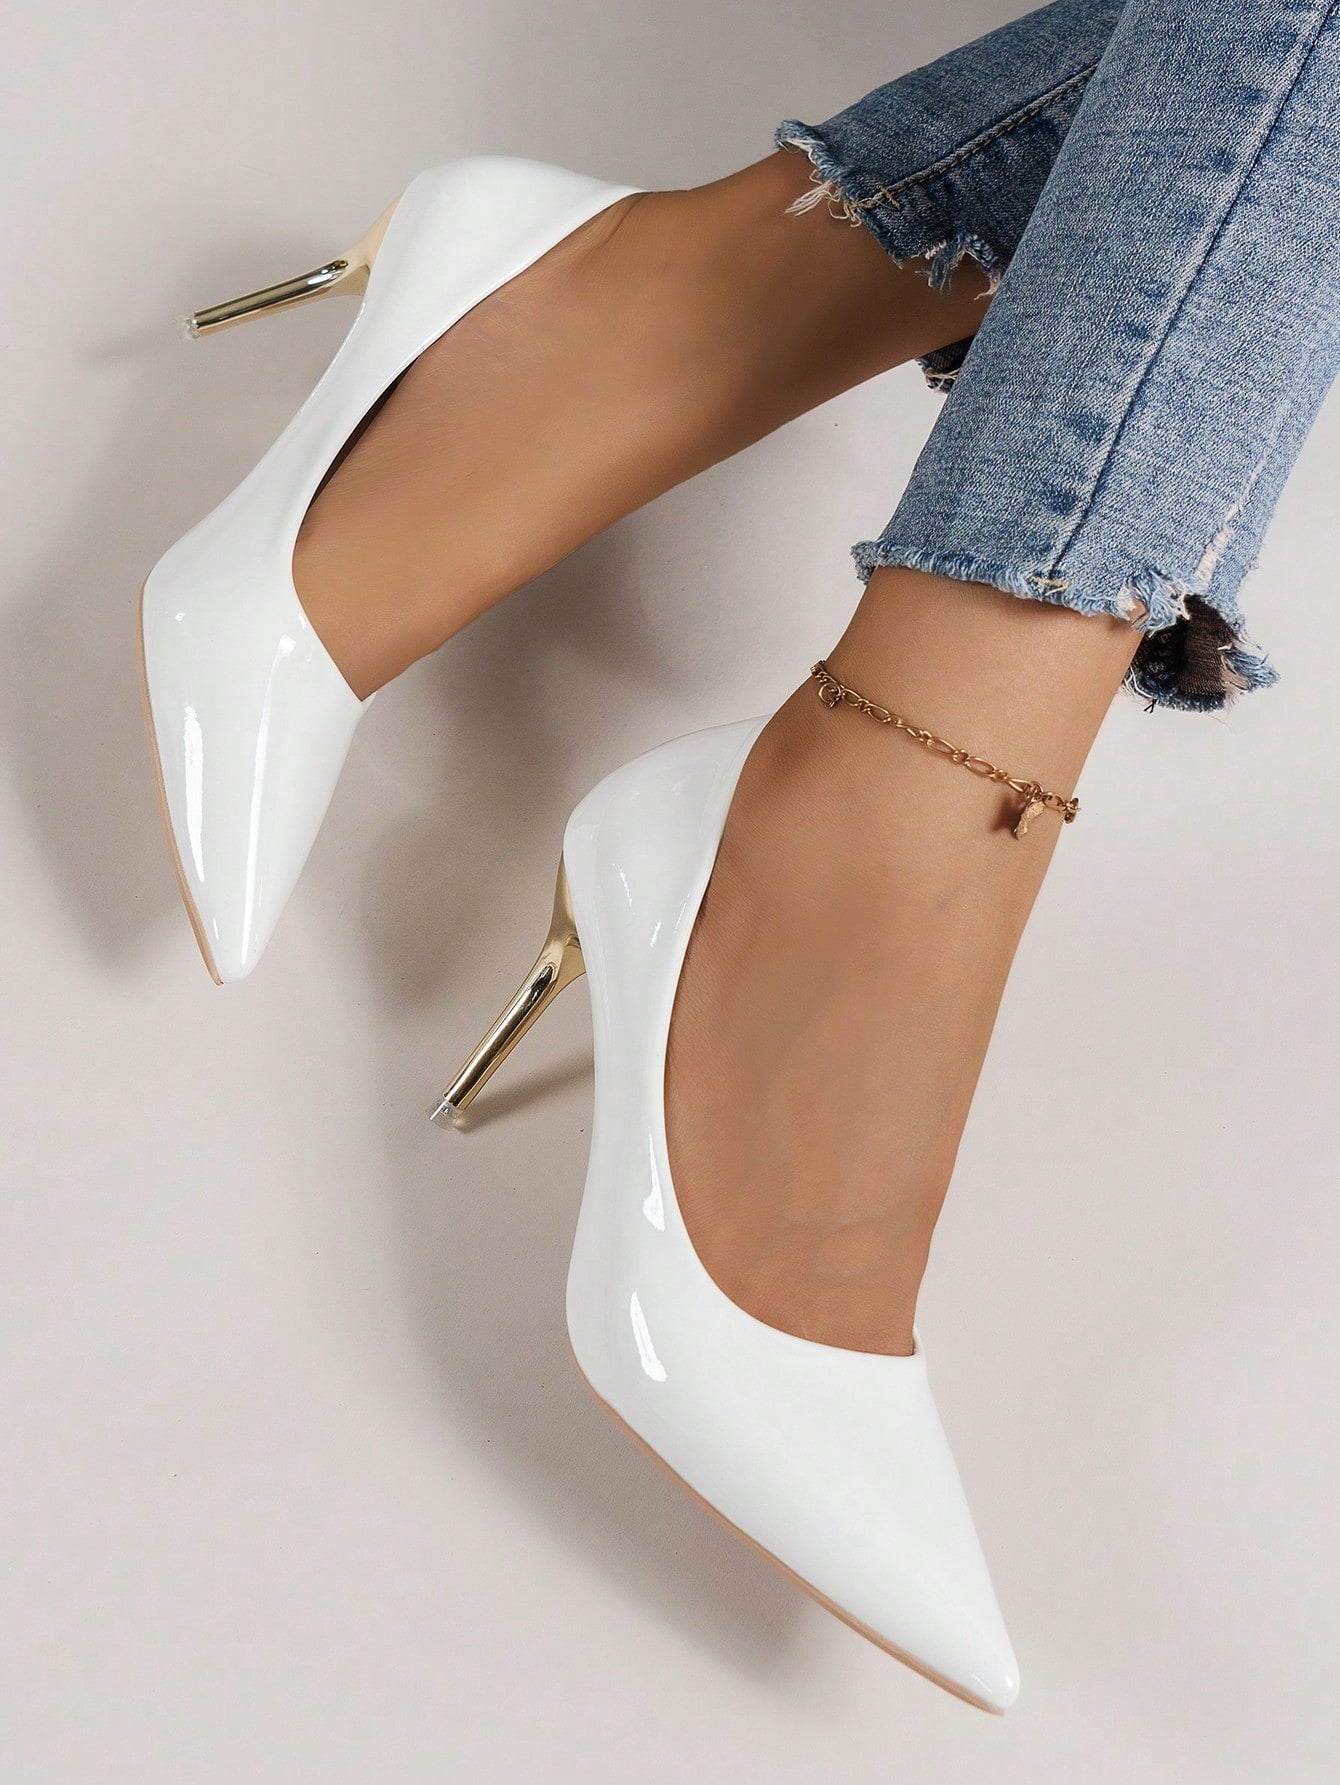 White Pointed Shiny Patent Leather Electroplating High-Heeled Shoes For Women's Formal Outfit, Elegant White High-Heels